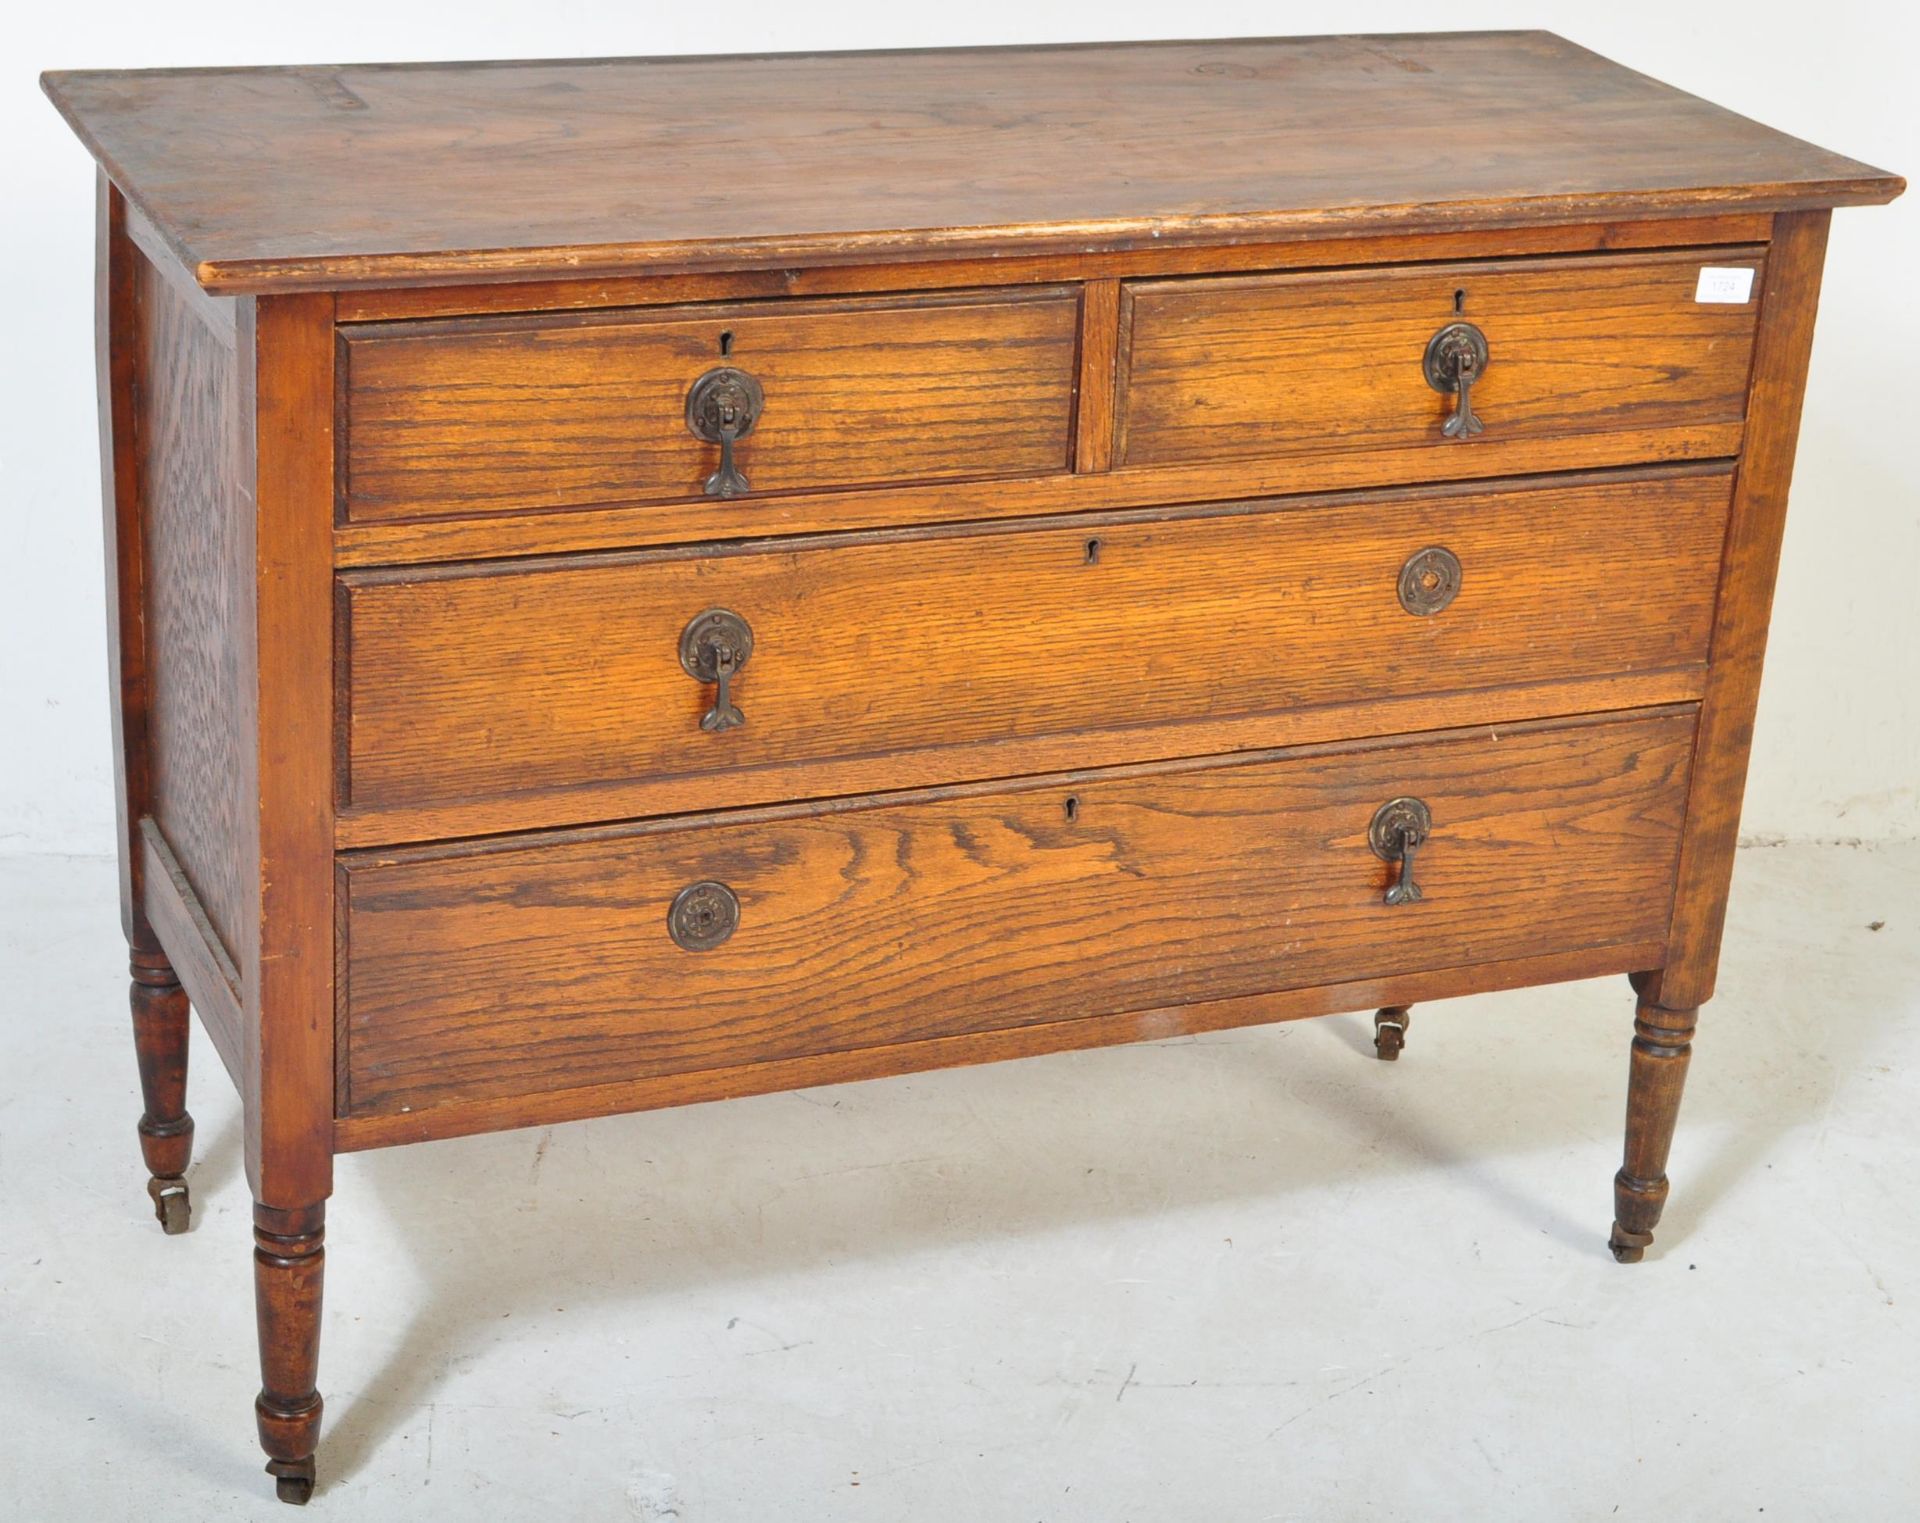 EARLY 20TH CENTURY JACOBEAN REVIVAL SIDEBOARD - Image 2 of 5